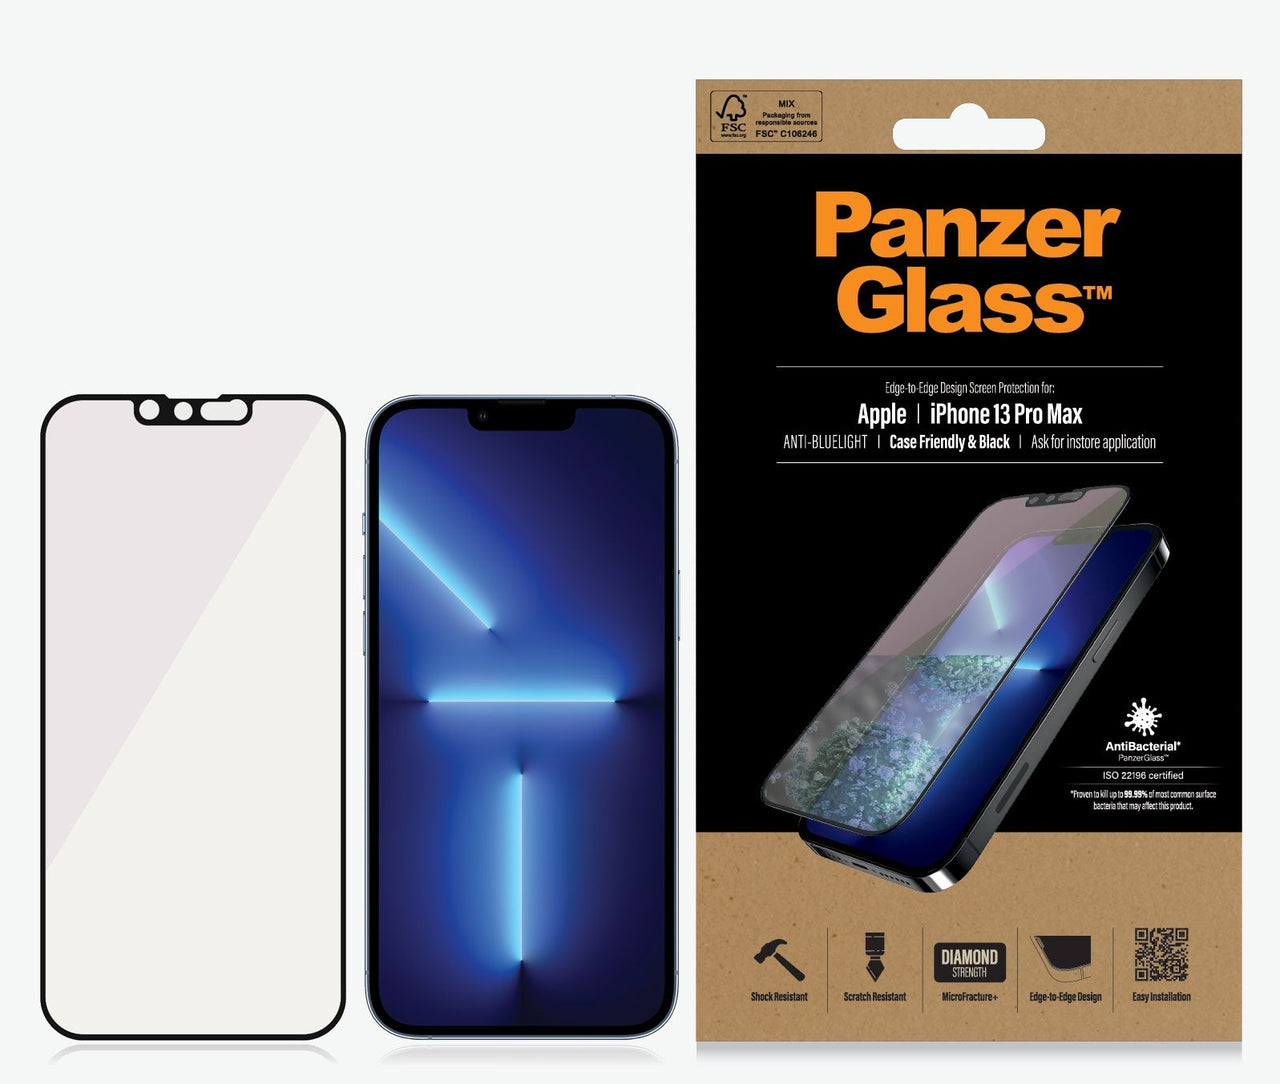 Panzer Glass Anti-bluelight Screen Protector for iPhone 13 Pro Max - Black